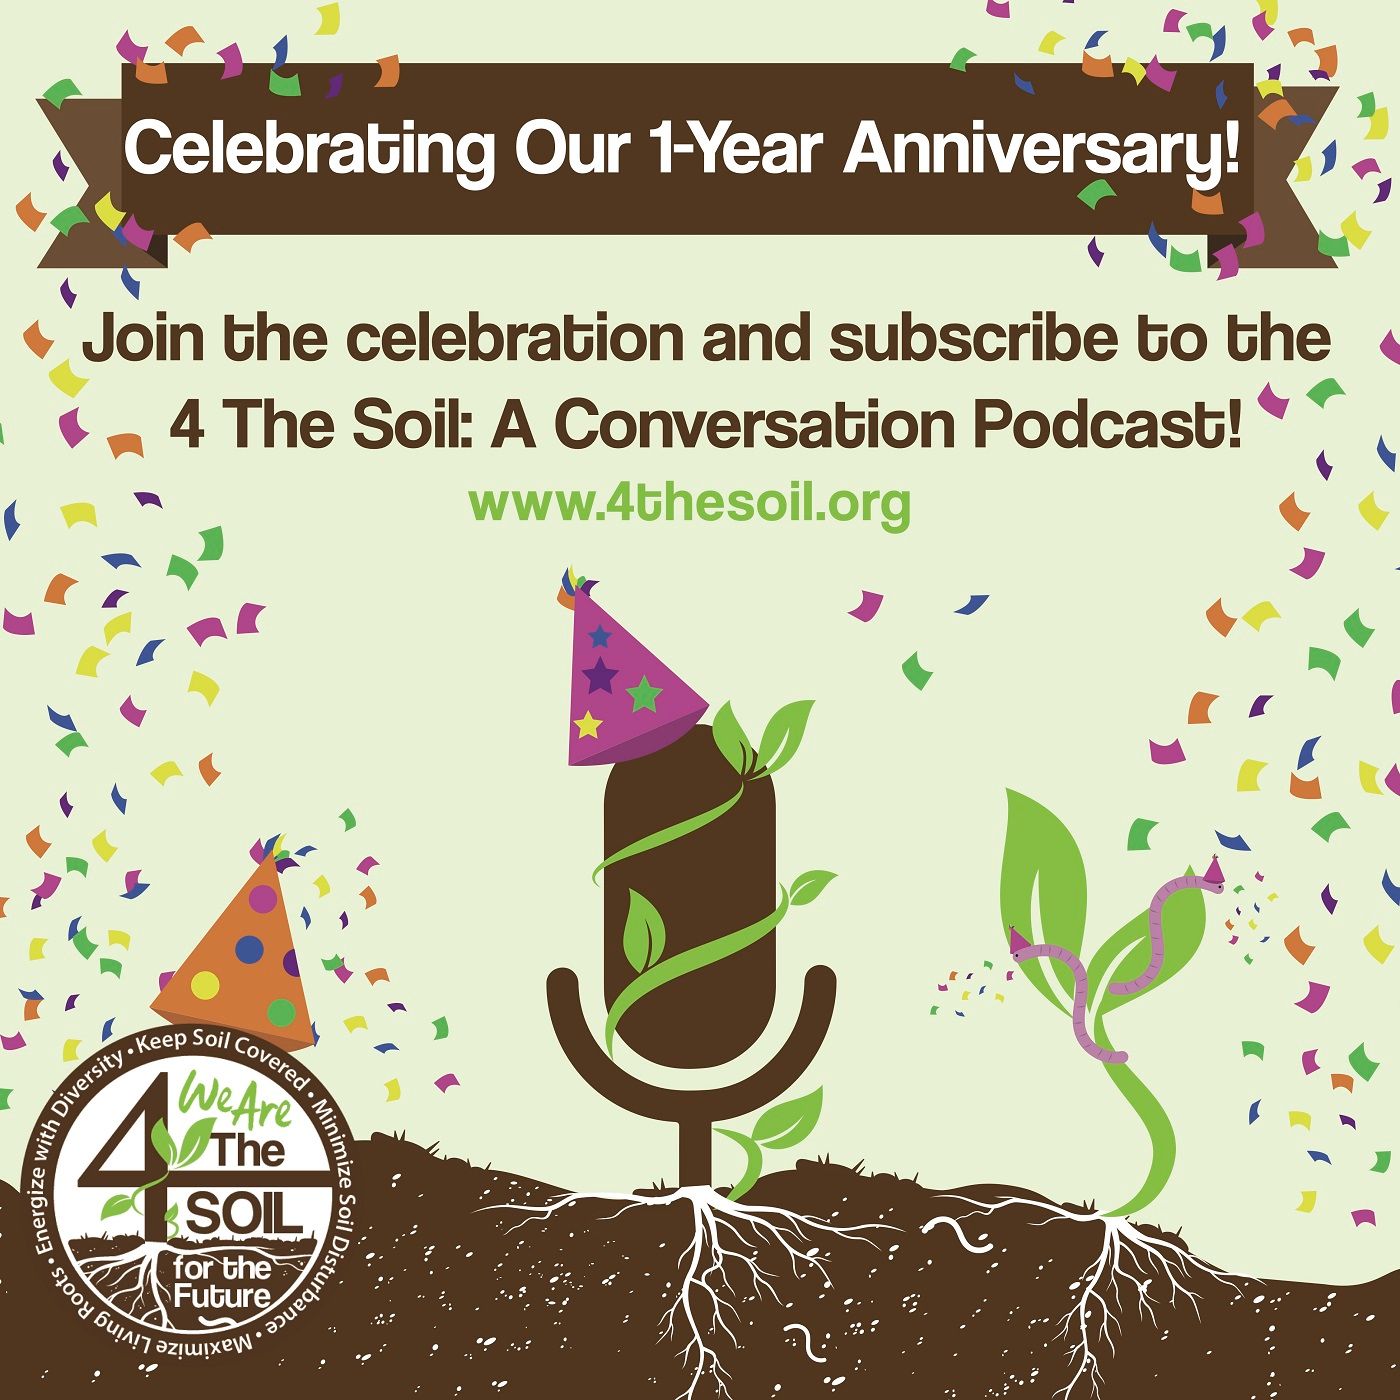 Episode 22 - Special First Anniversary Edition of 4 The Soil: A Conversation Podcast with Mary, Jeff, and Eric